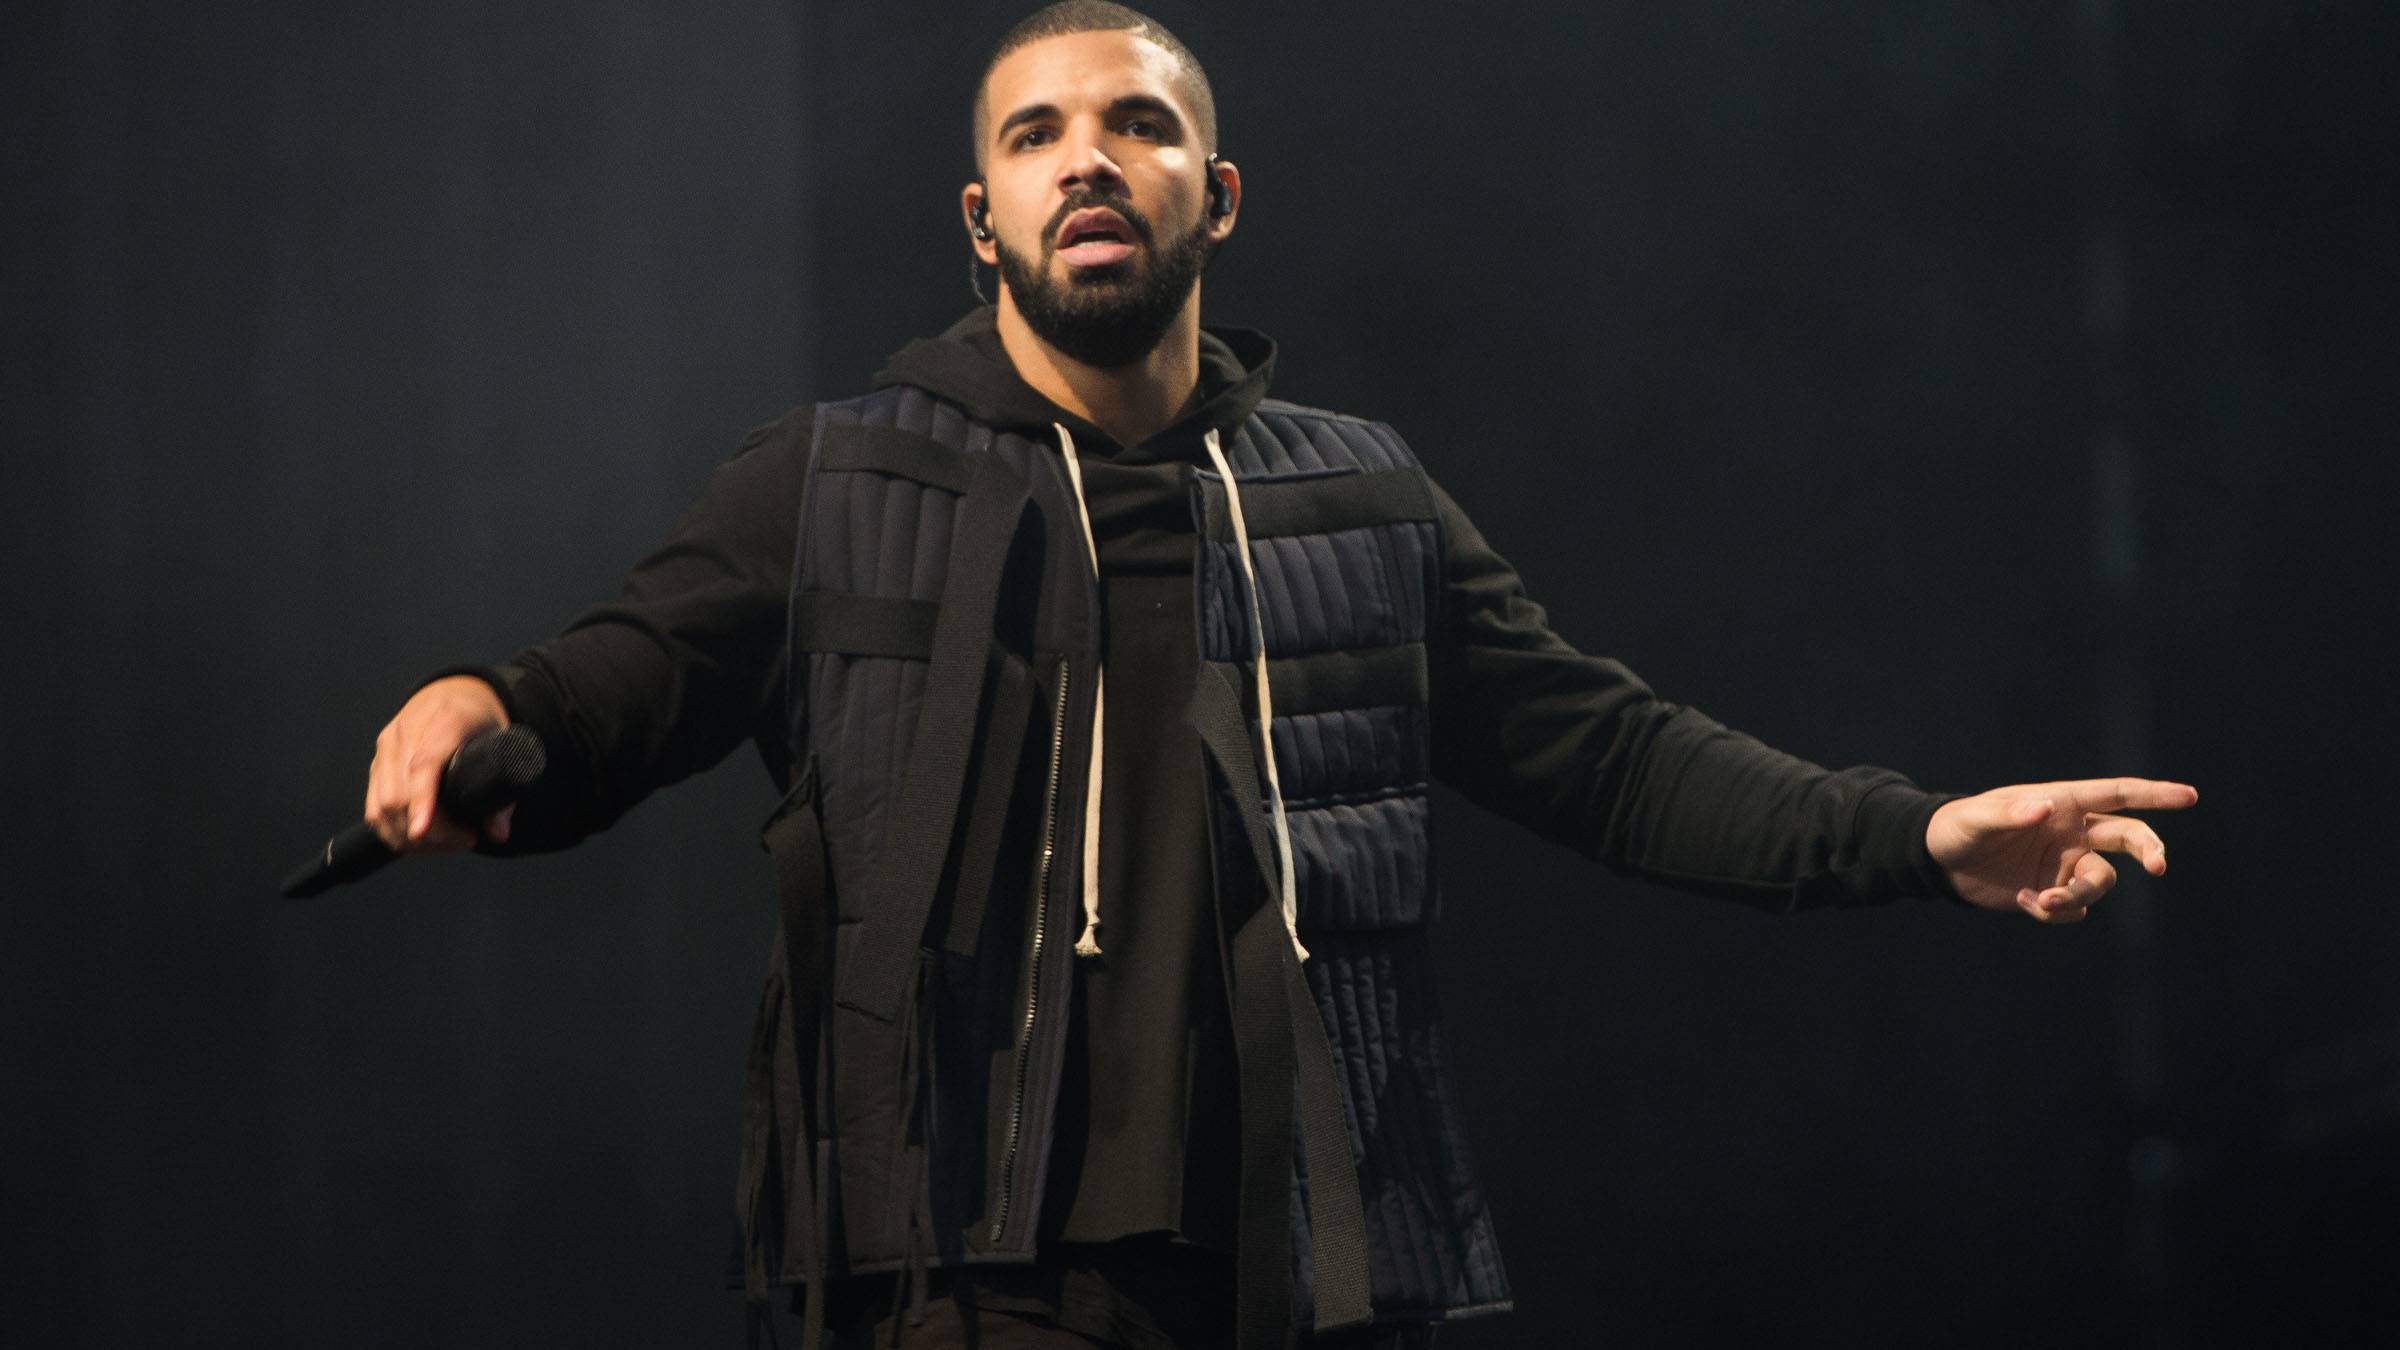 Size 36L Bra Leaves Drake Wondering 'How Many Letters Does It Go Up To?', News